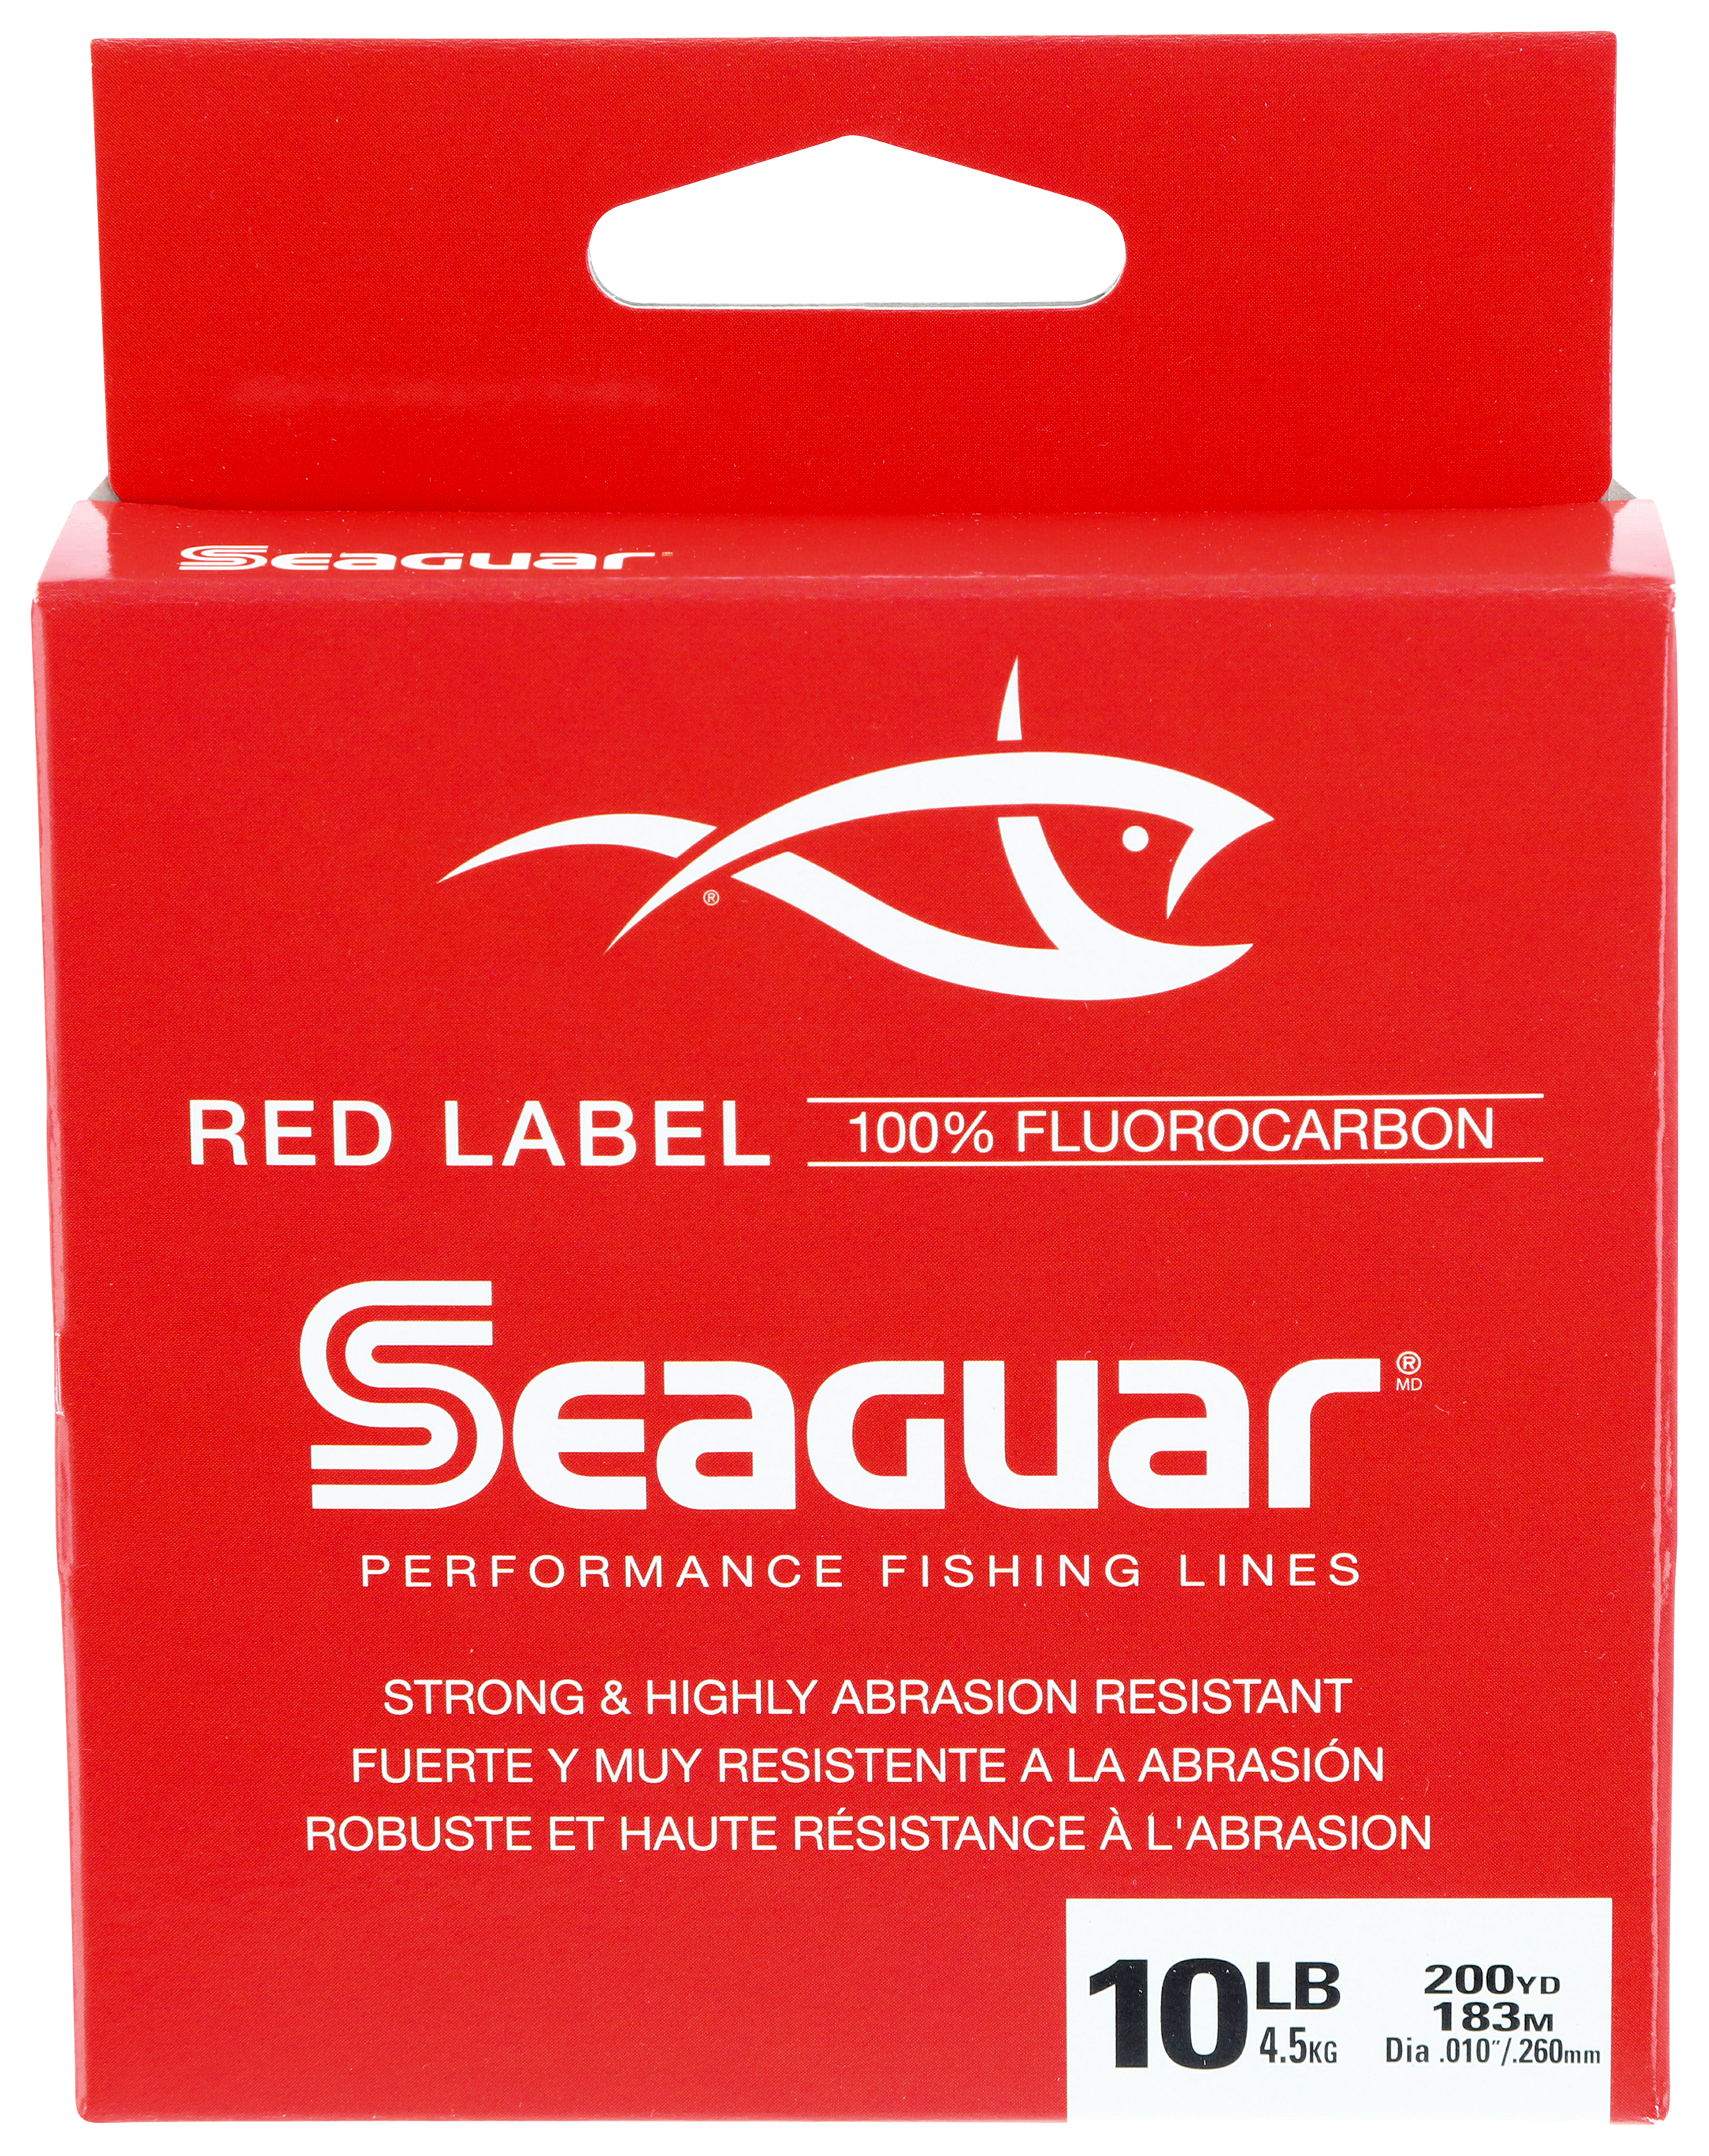 SEAGUAR RED LABEL 100% Fluorocarbon 12lb/1000yd 12RM1000 NEW! FREE USA  SHIPPING!